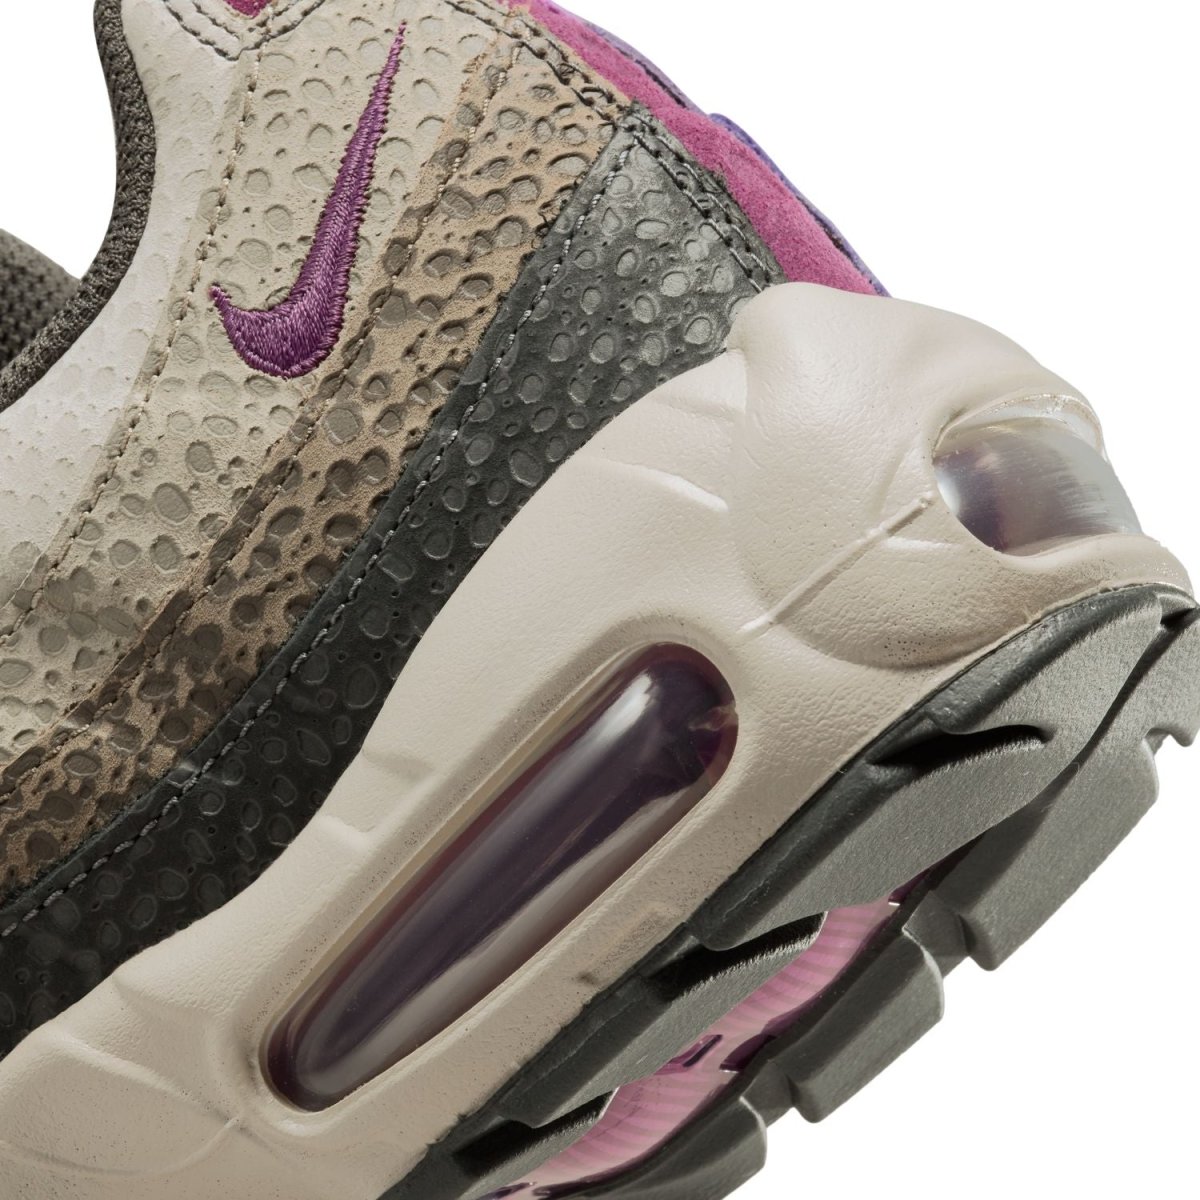 Nike Womens Air Max 95 (DX2955-001) - STNDRD ATHLETIC CO.